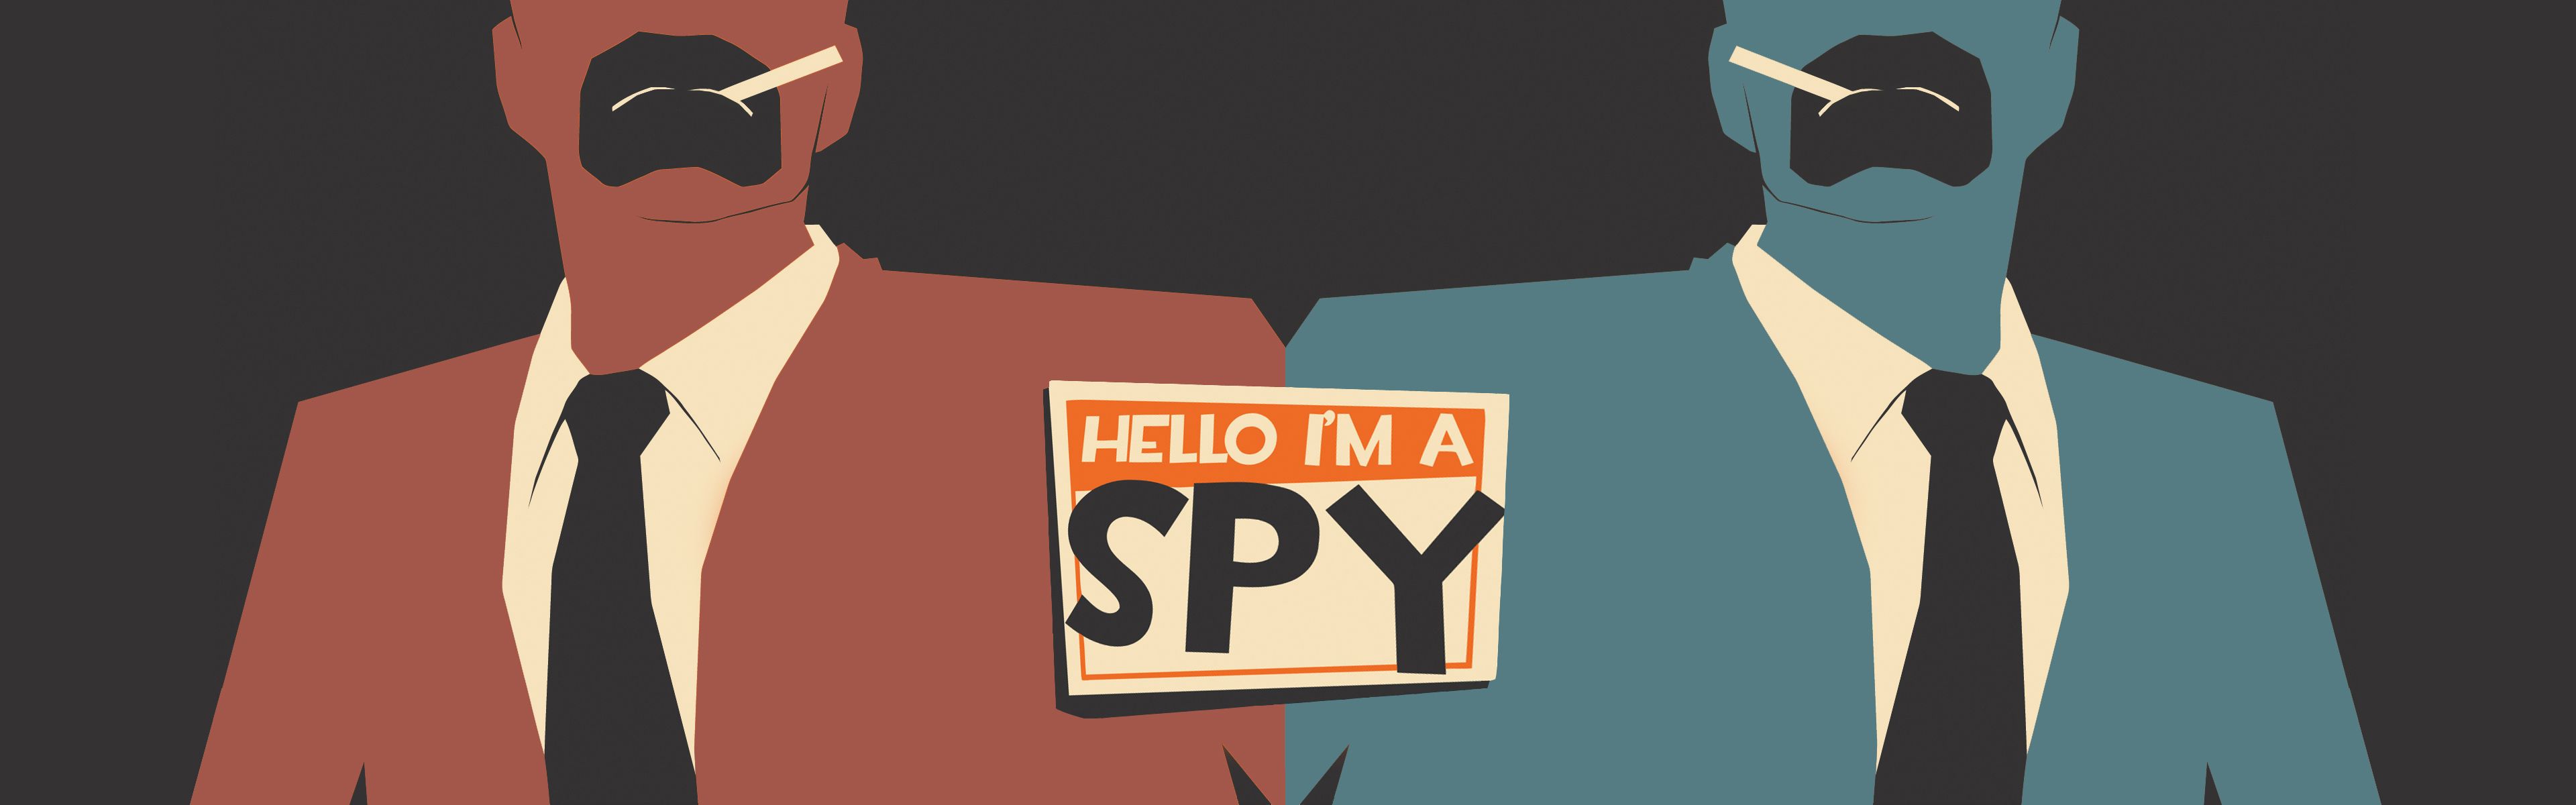 Wallpaper Team Fortress Spy Tf Spycrab Image For